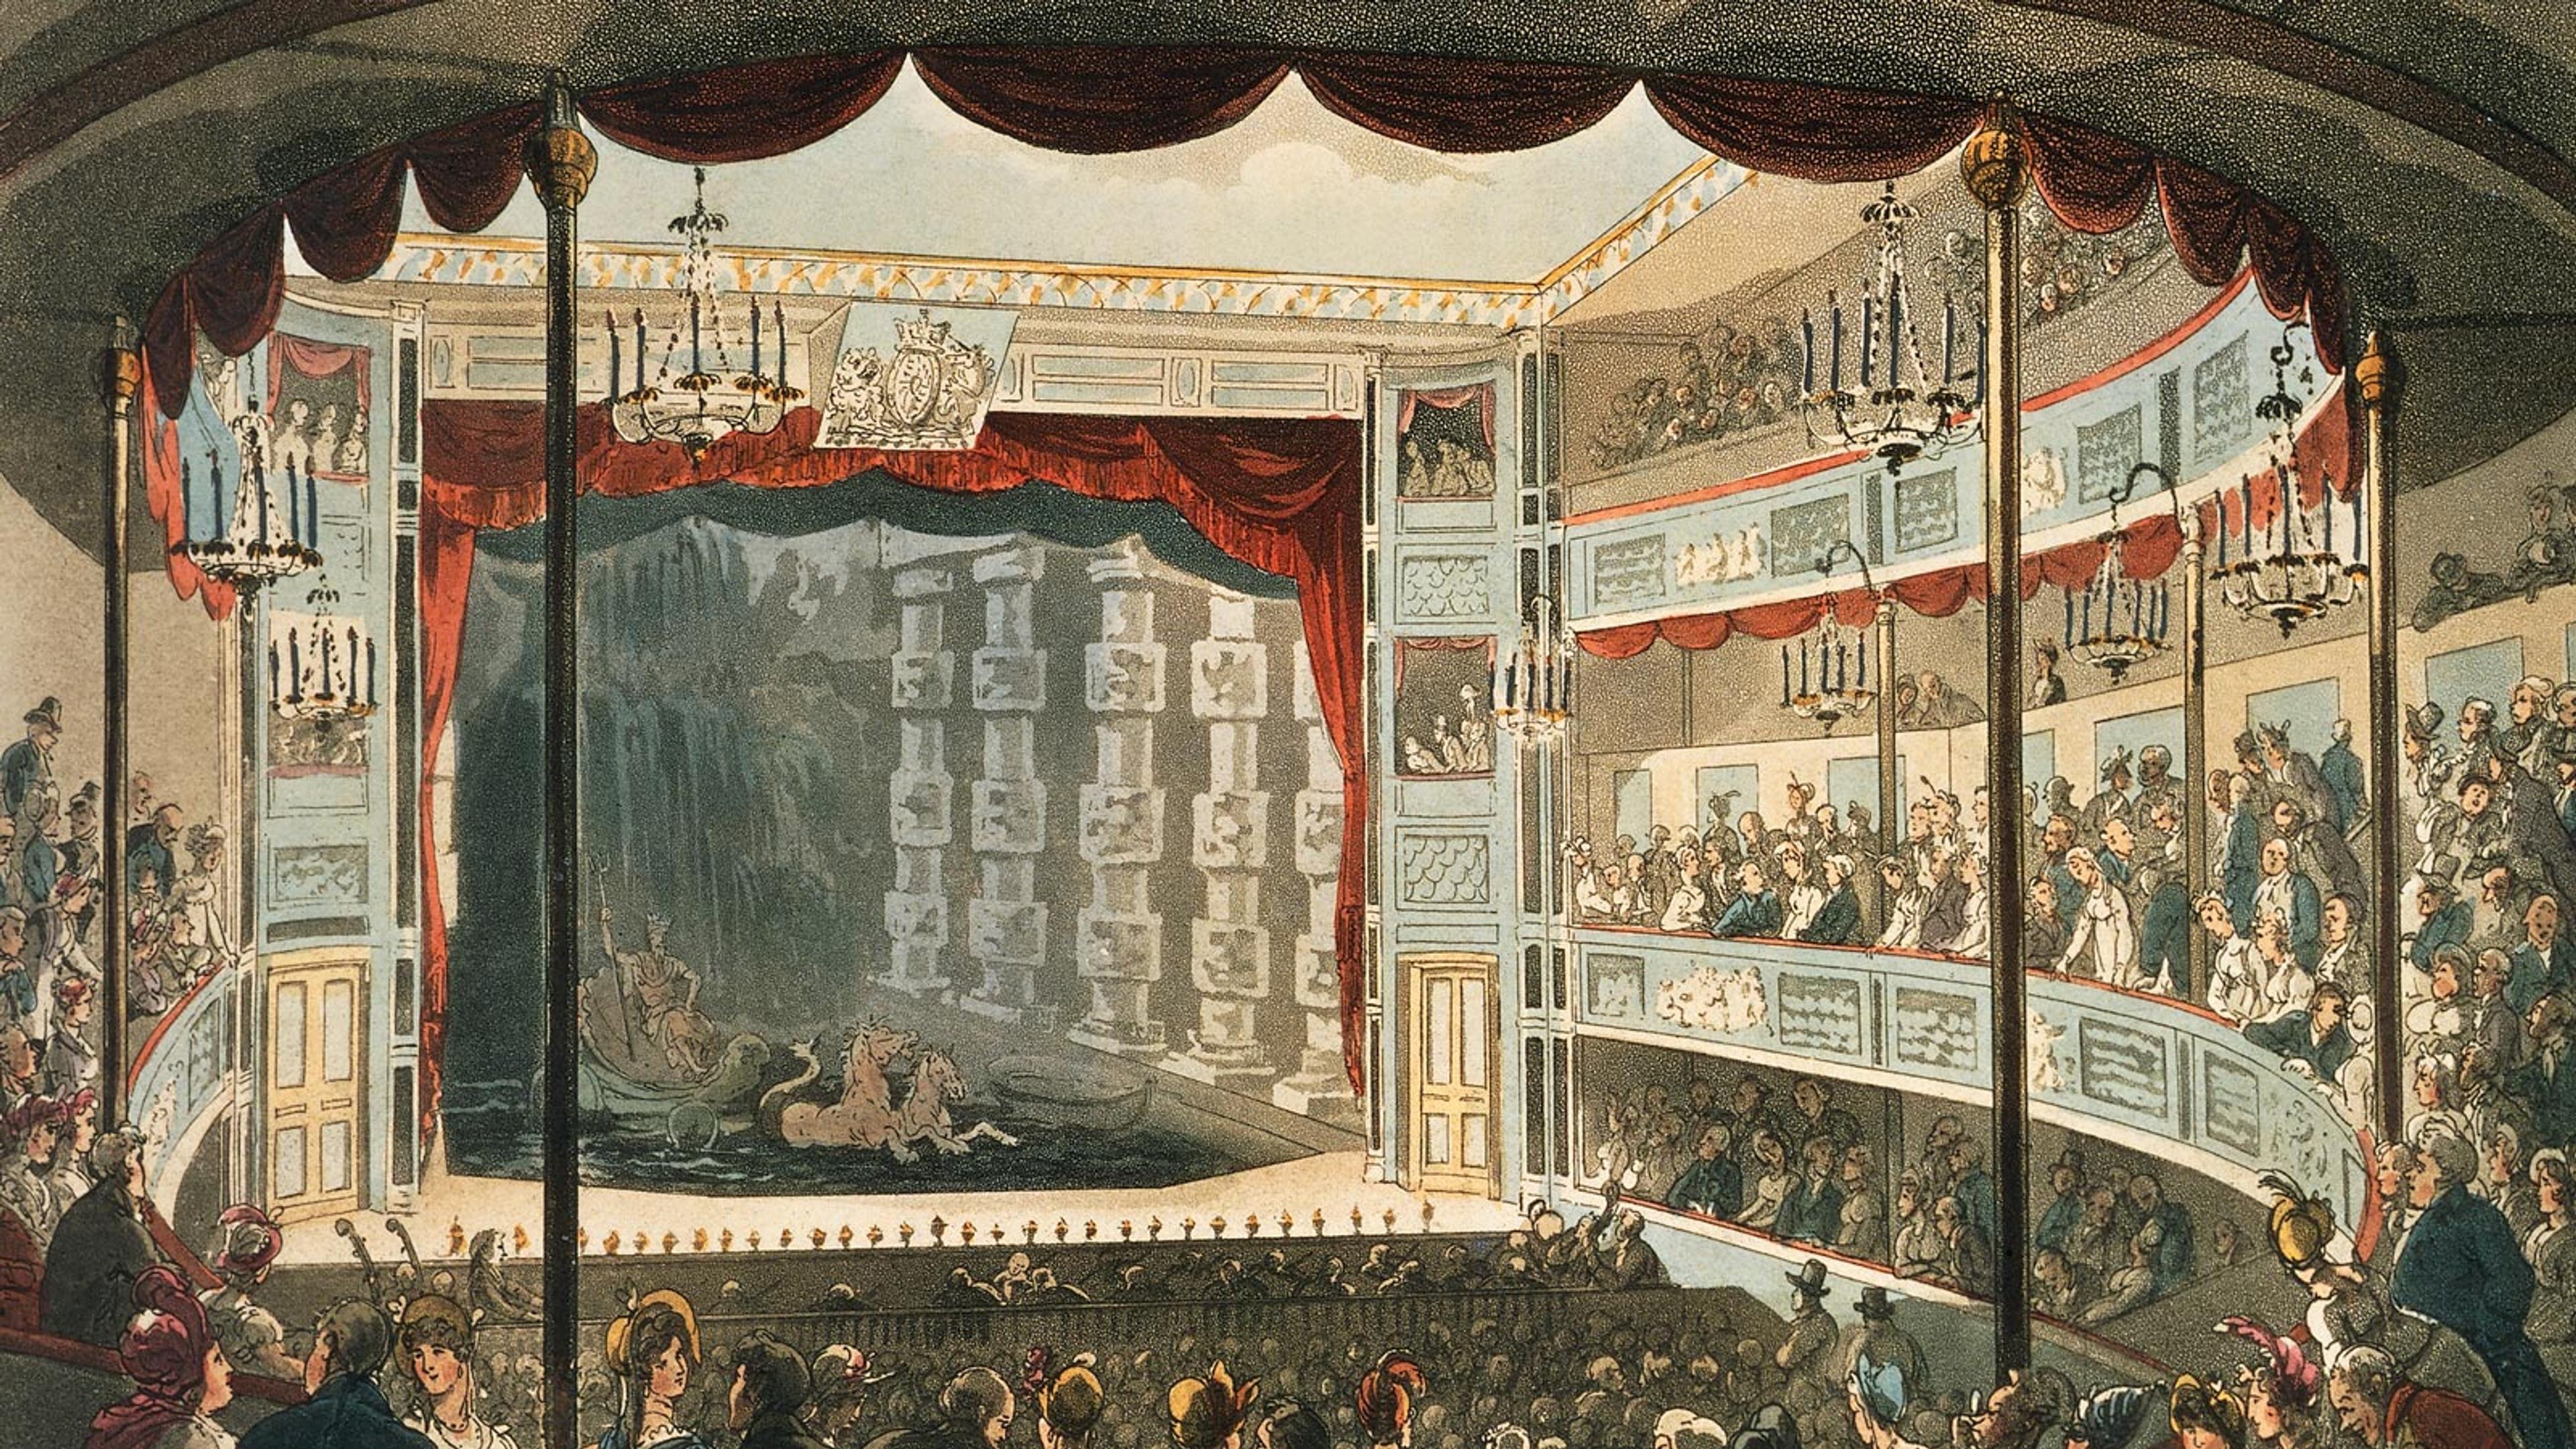 interior of a theatre with an audience watching a stage that has a sunken tank of water with horses in it and a person in a shell floating on top